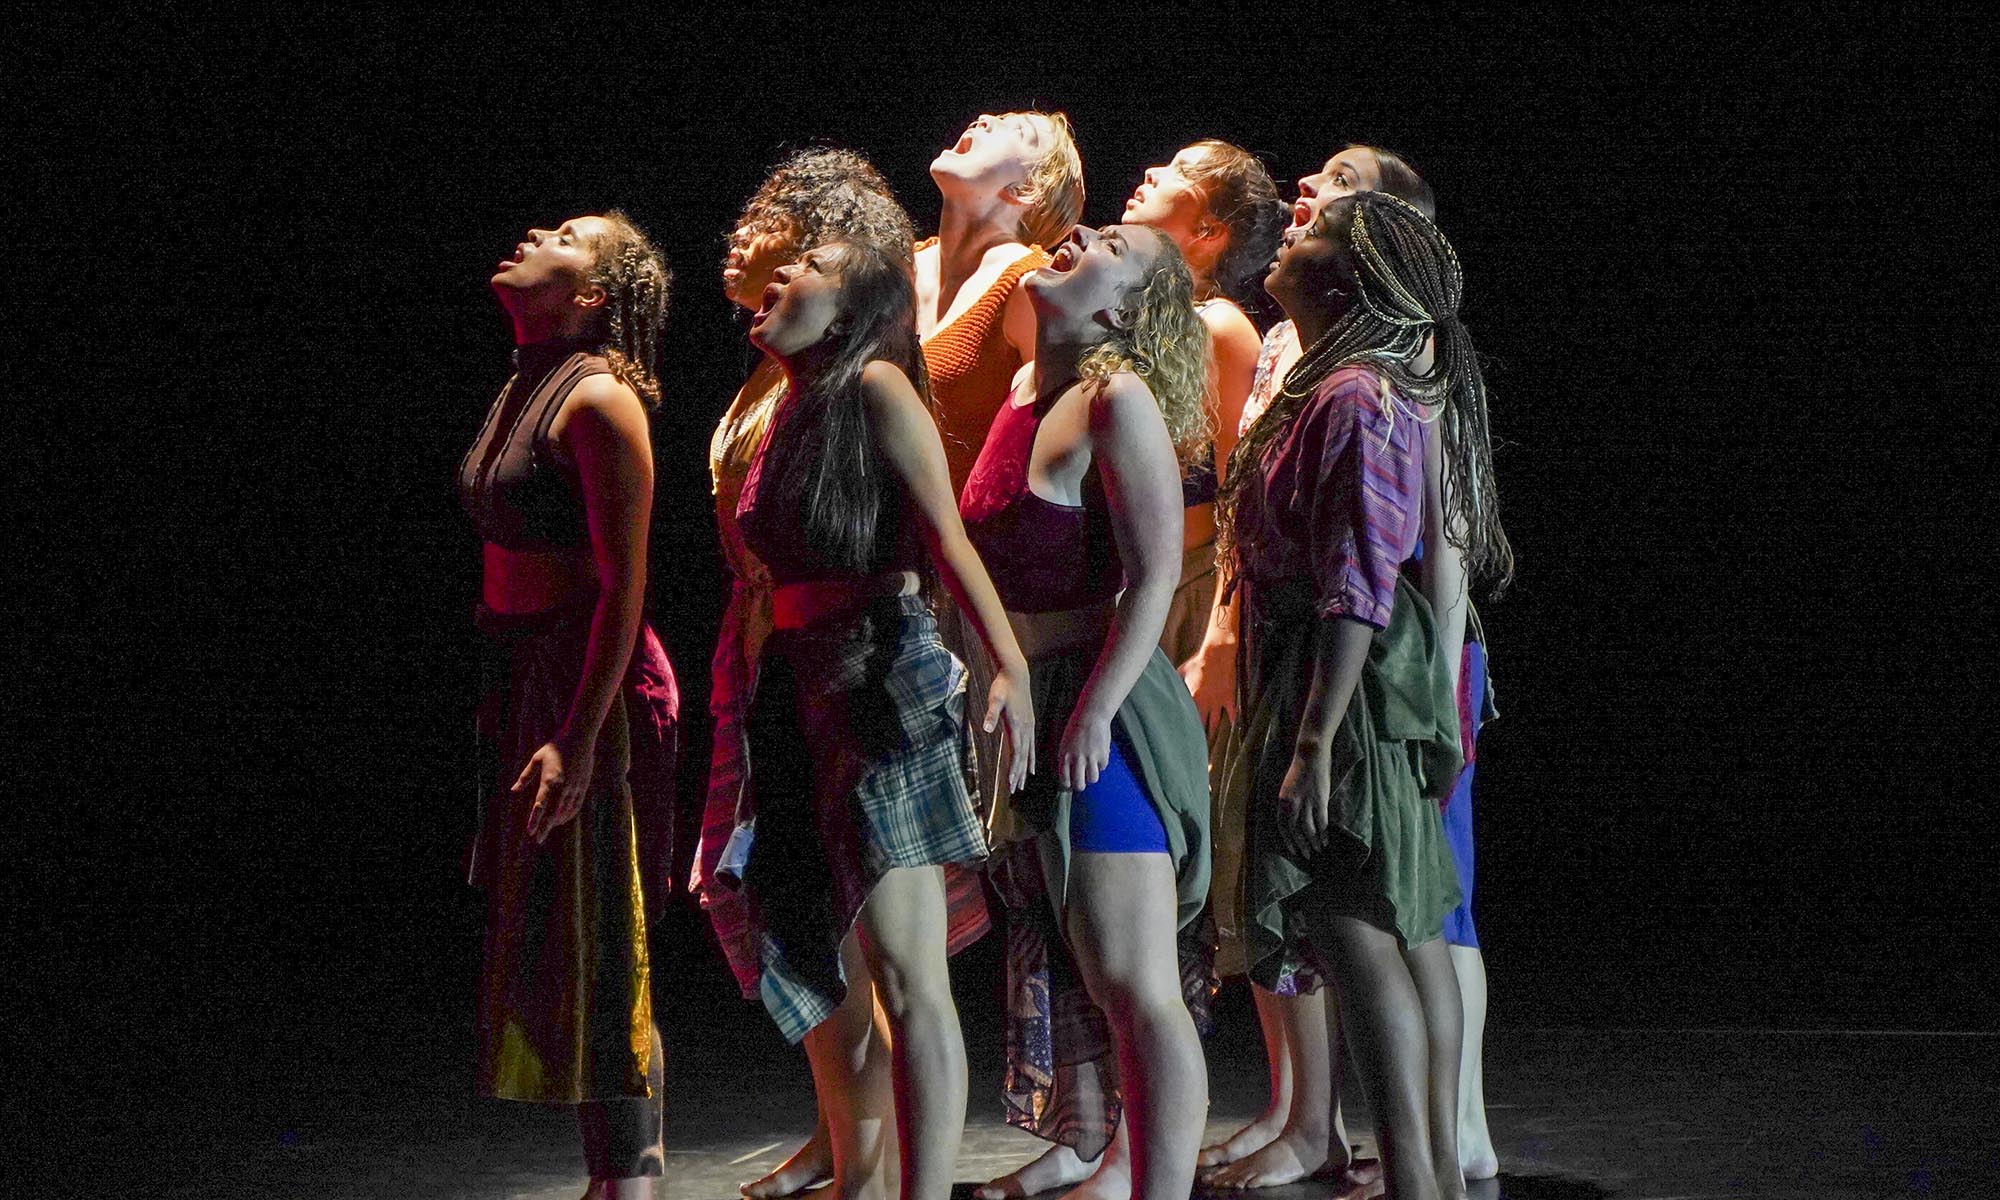 A group of 8 dancers stare upwards